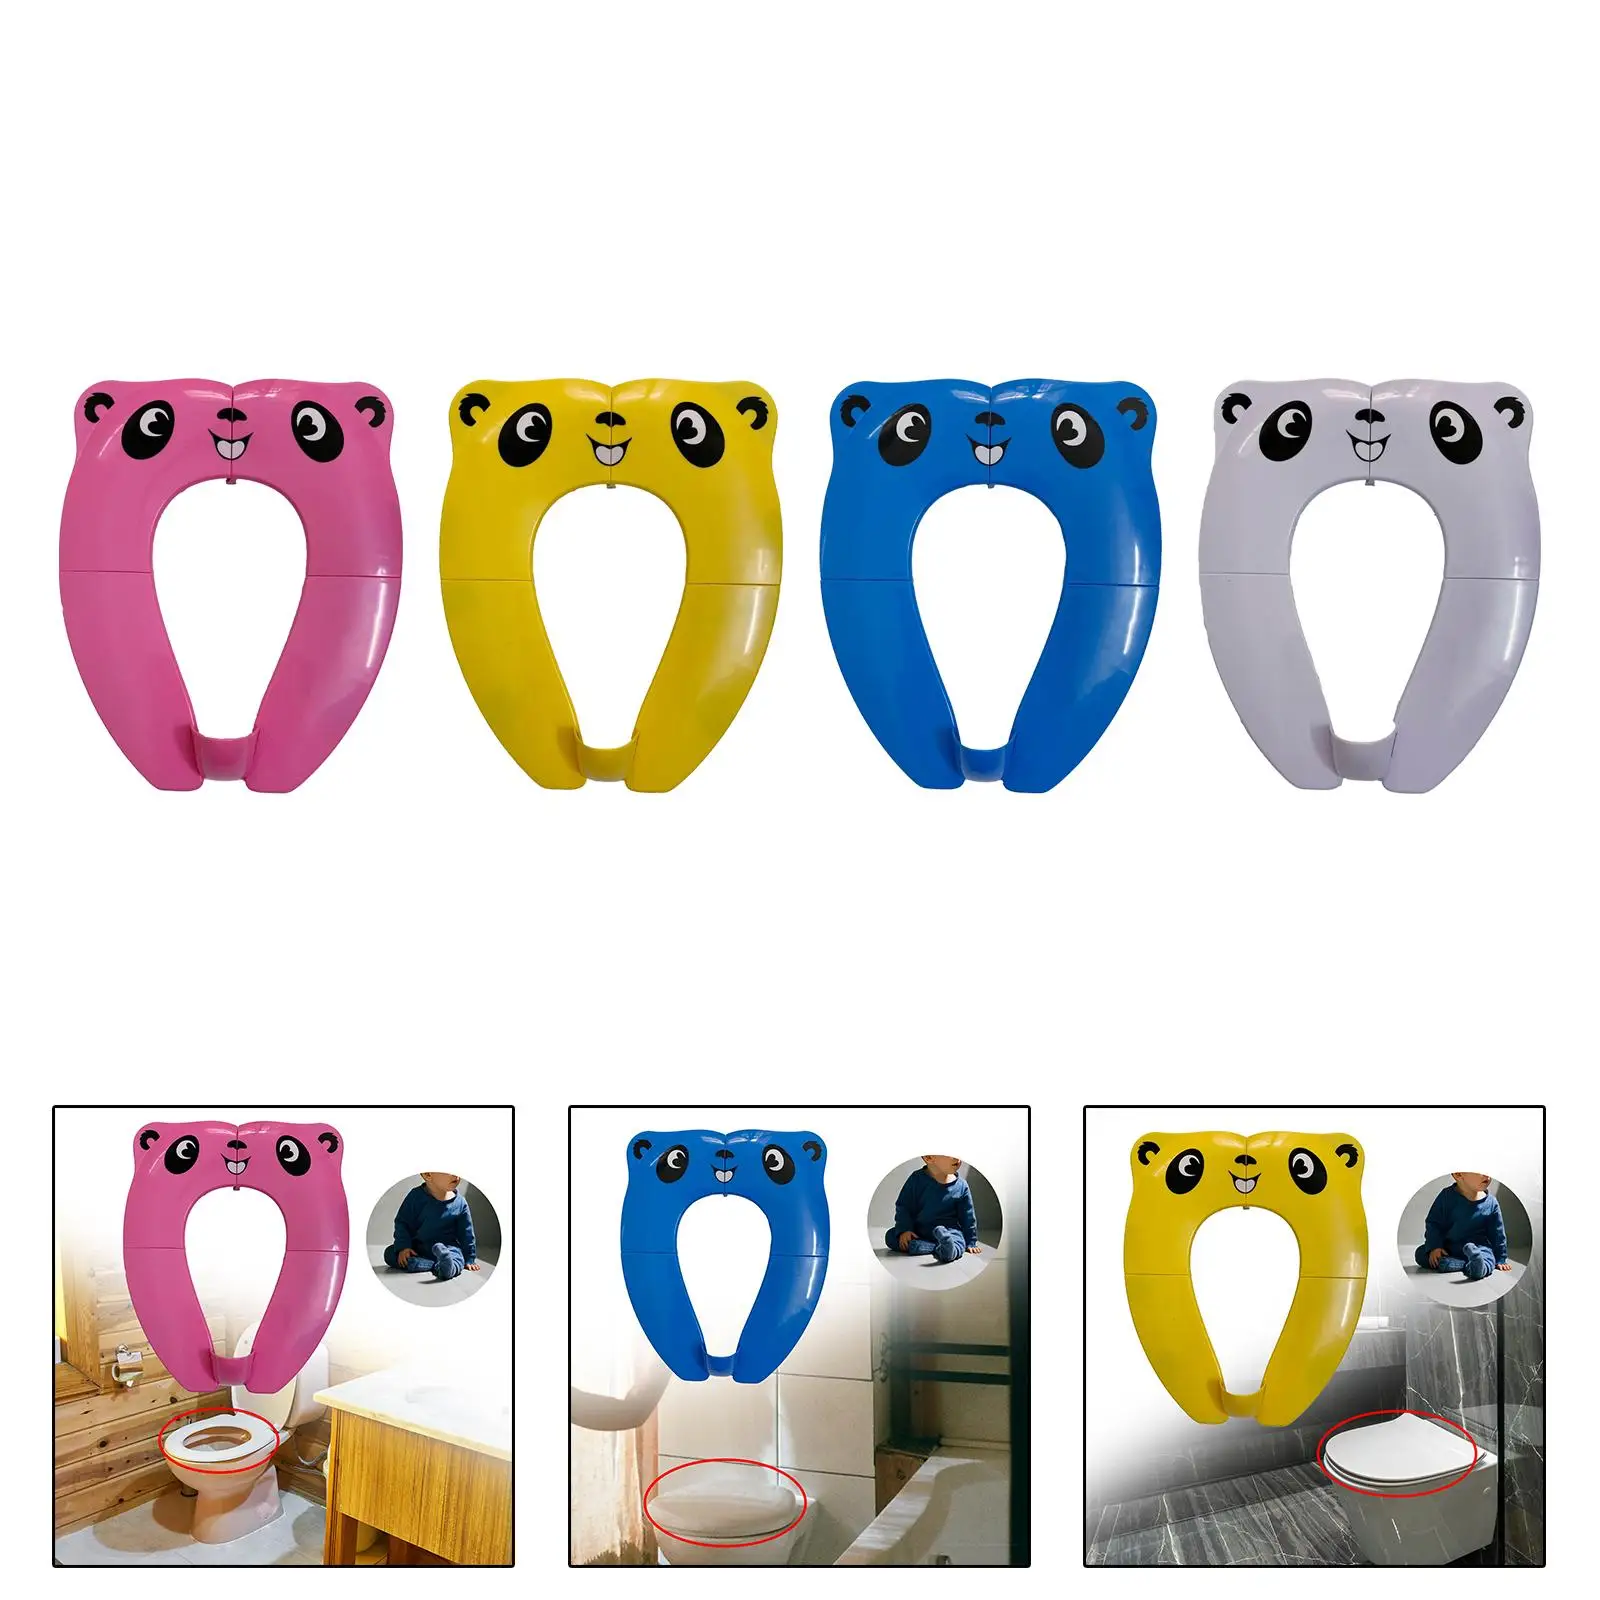 Folding Portable Potty Seat Reusable Toilet Pad Potty Toilet Seat with Splash Guard for Home Boys Baby Children